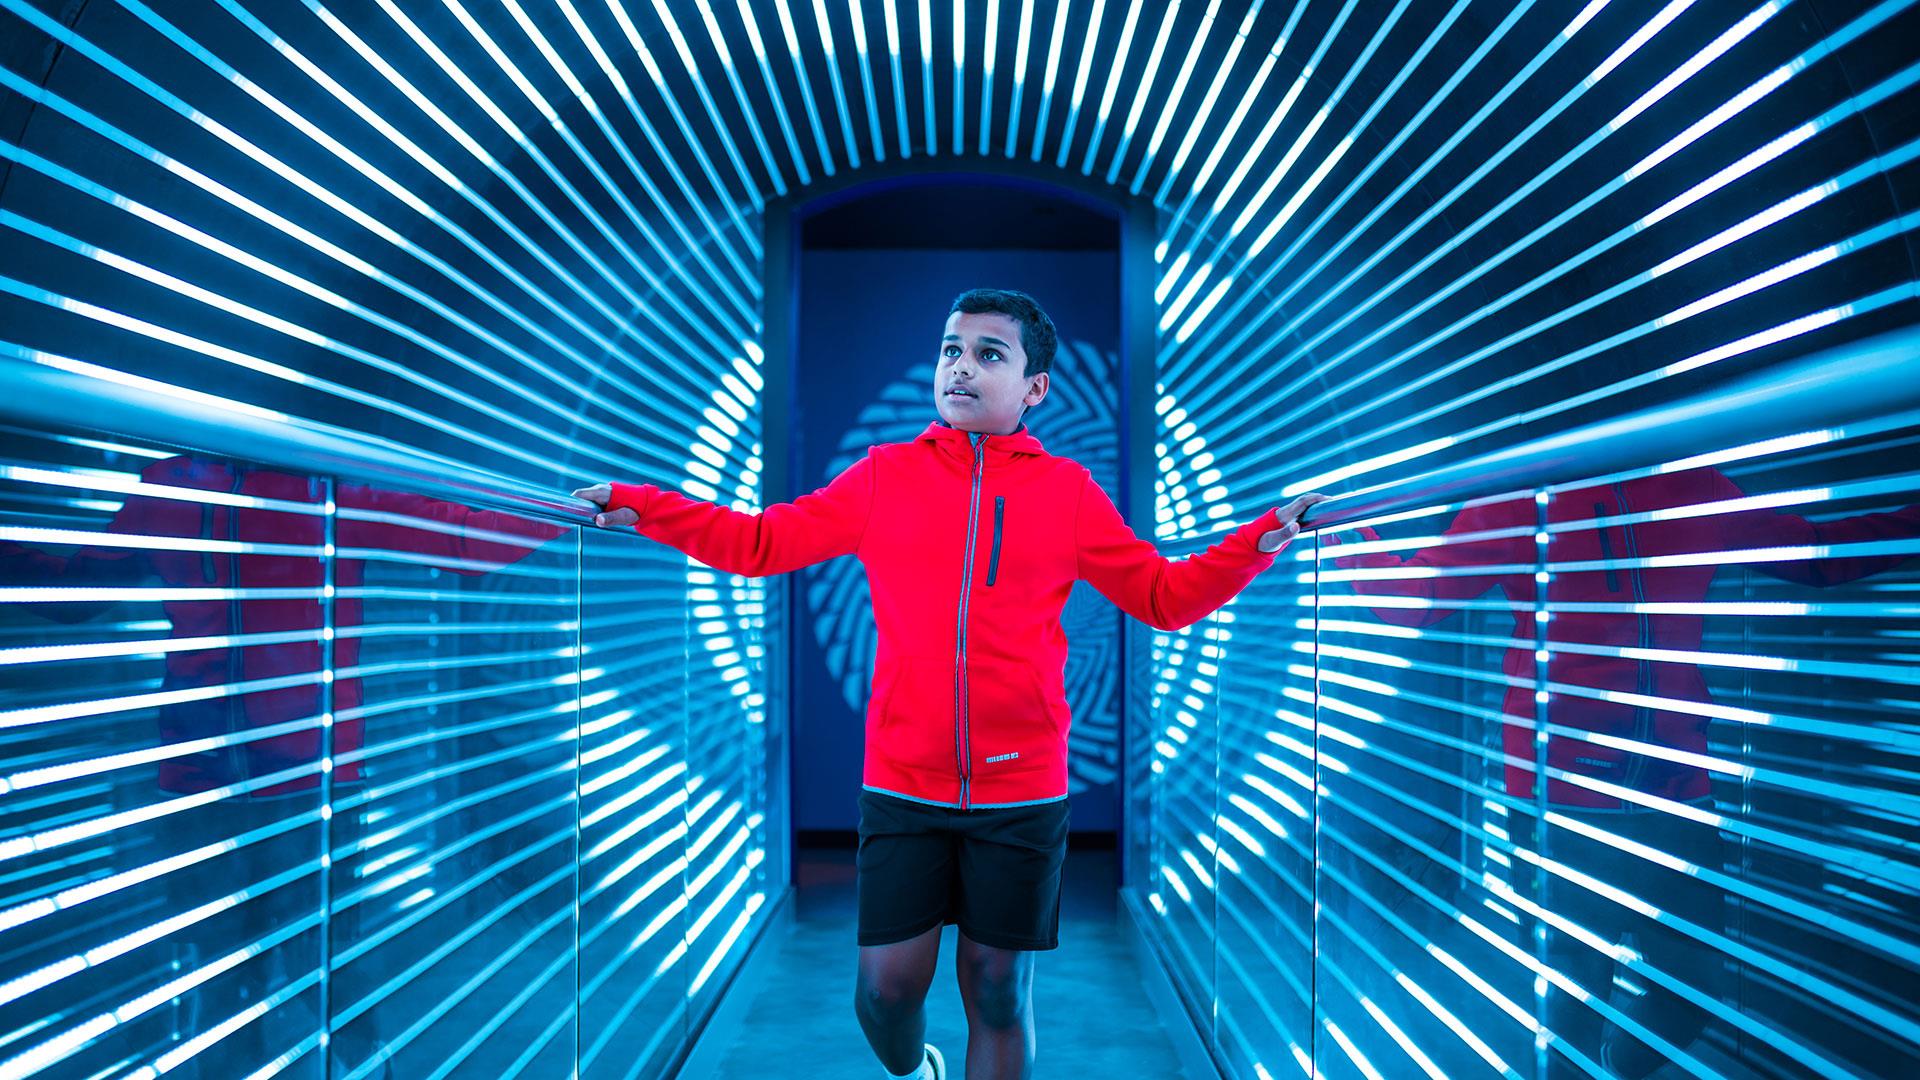 A mesmerising exhibition at W5 with a young boy walking through an optical illusion